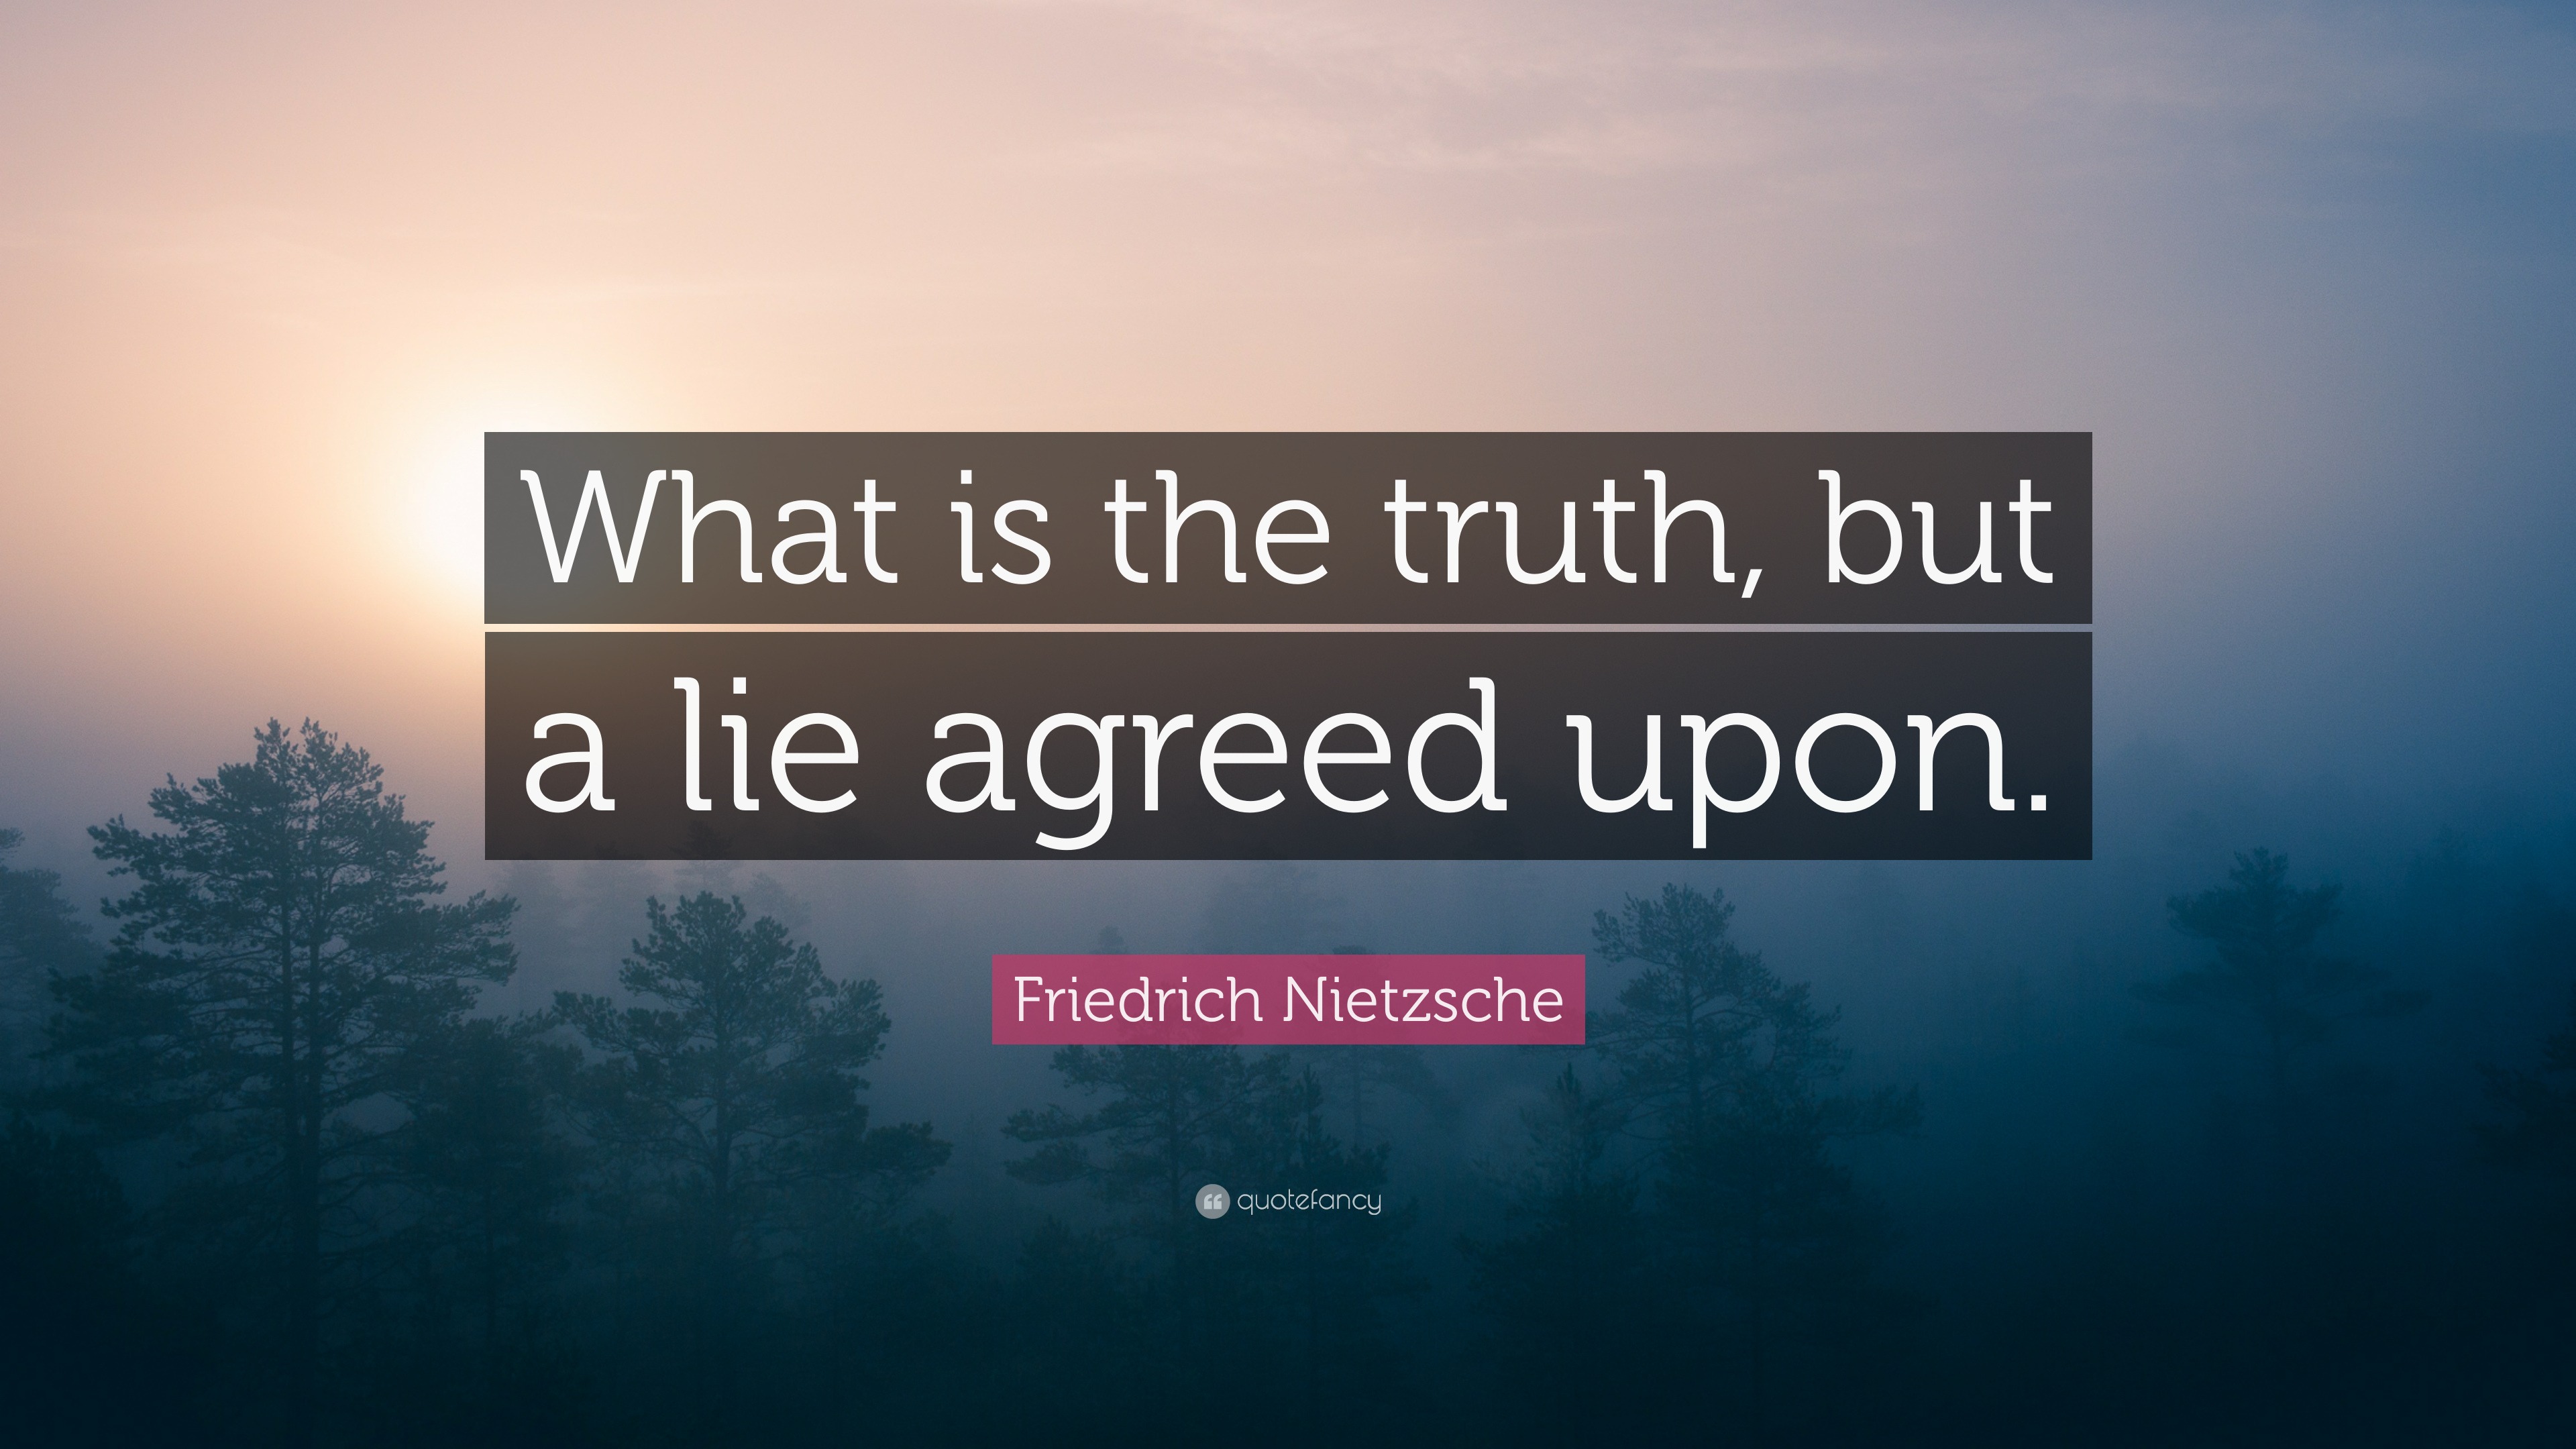 Friedrich Nietzsche Quote: "What is the truth, but a lie ...